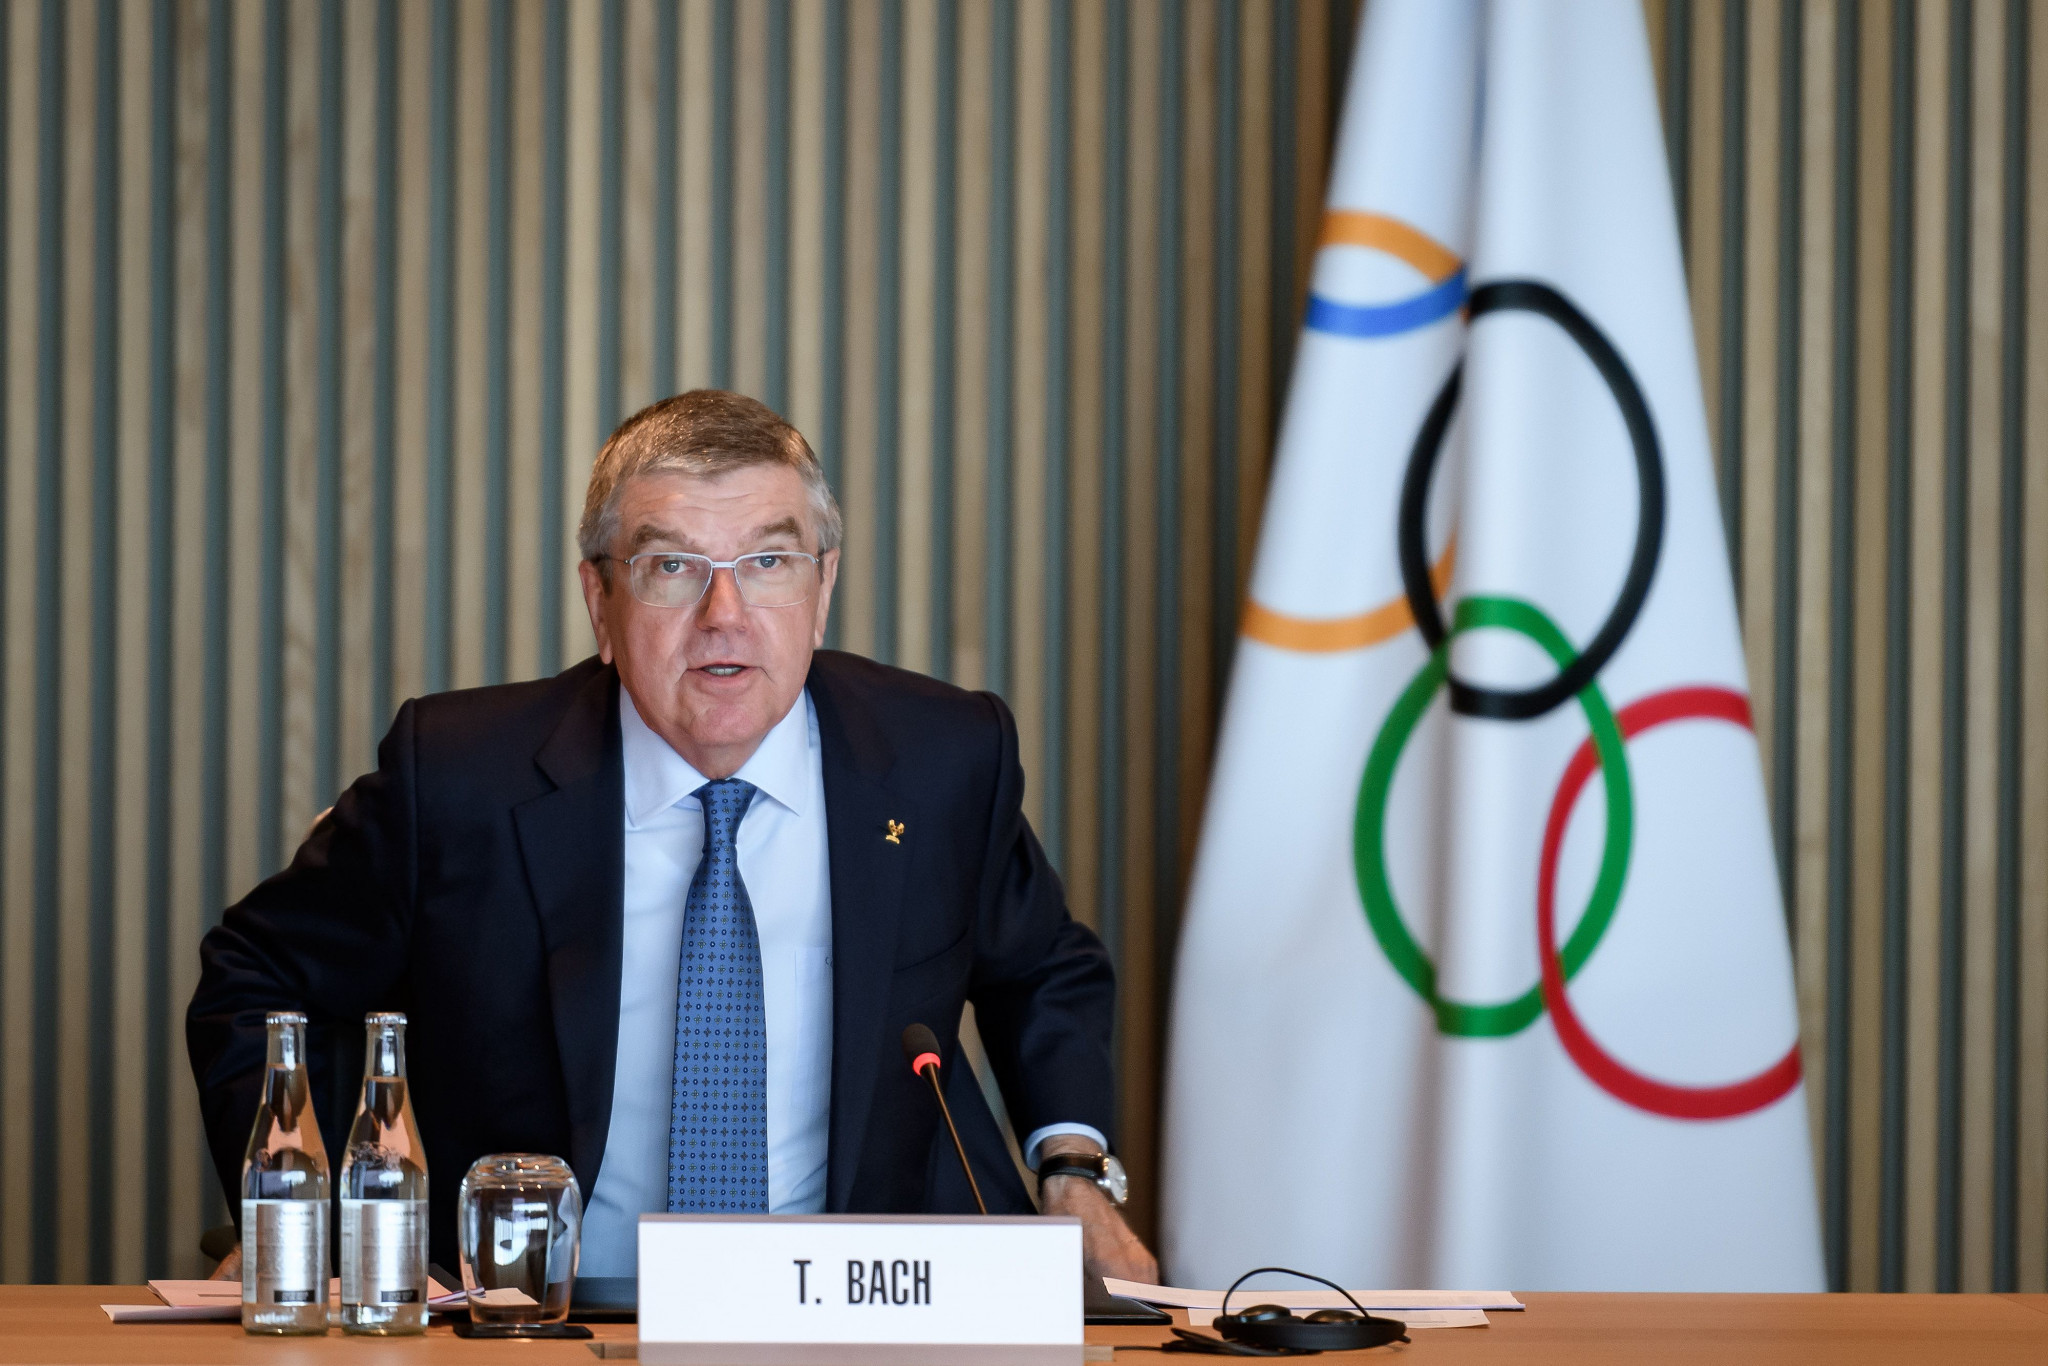 IOC President Thomas Bach said the decision was in response to climate change concerns ©Getty Images